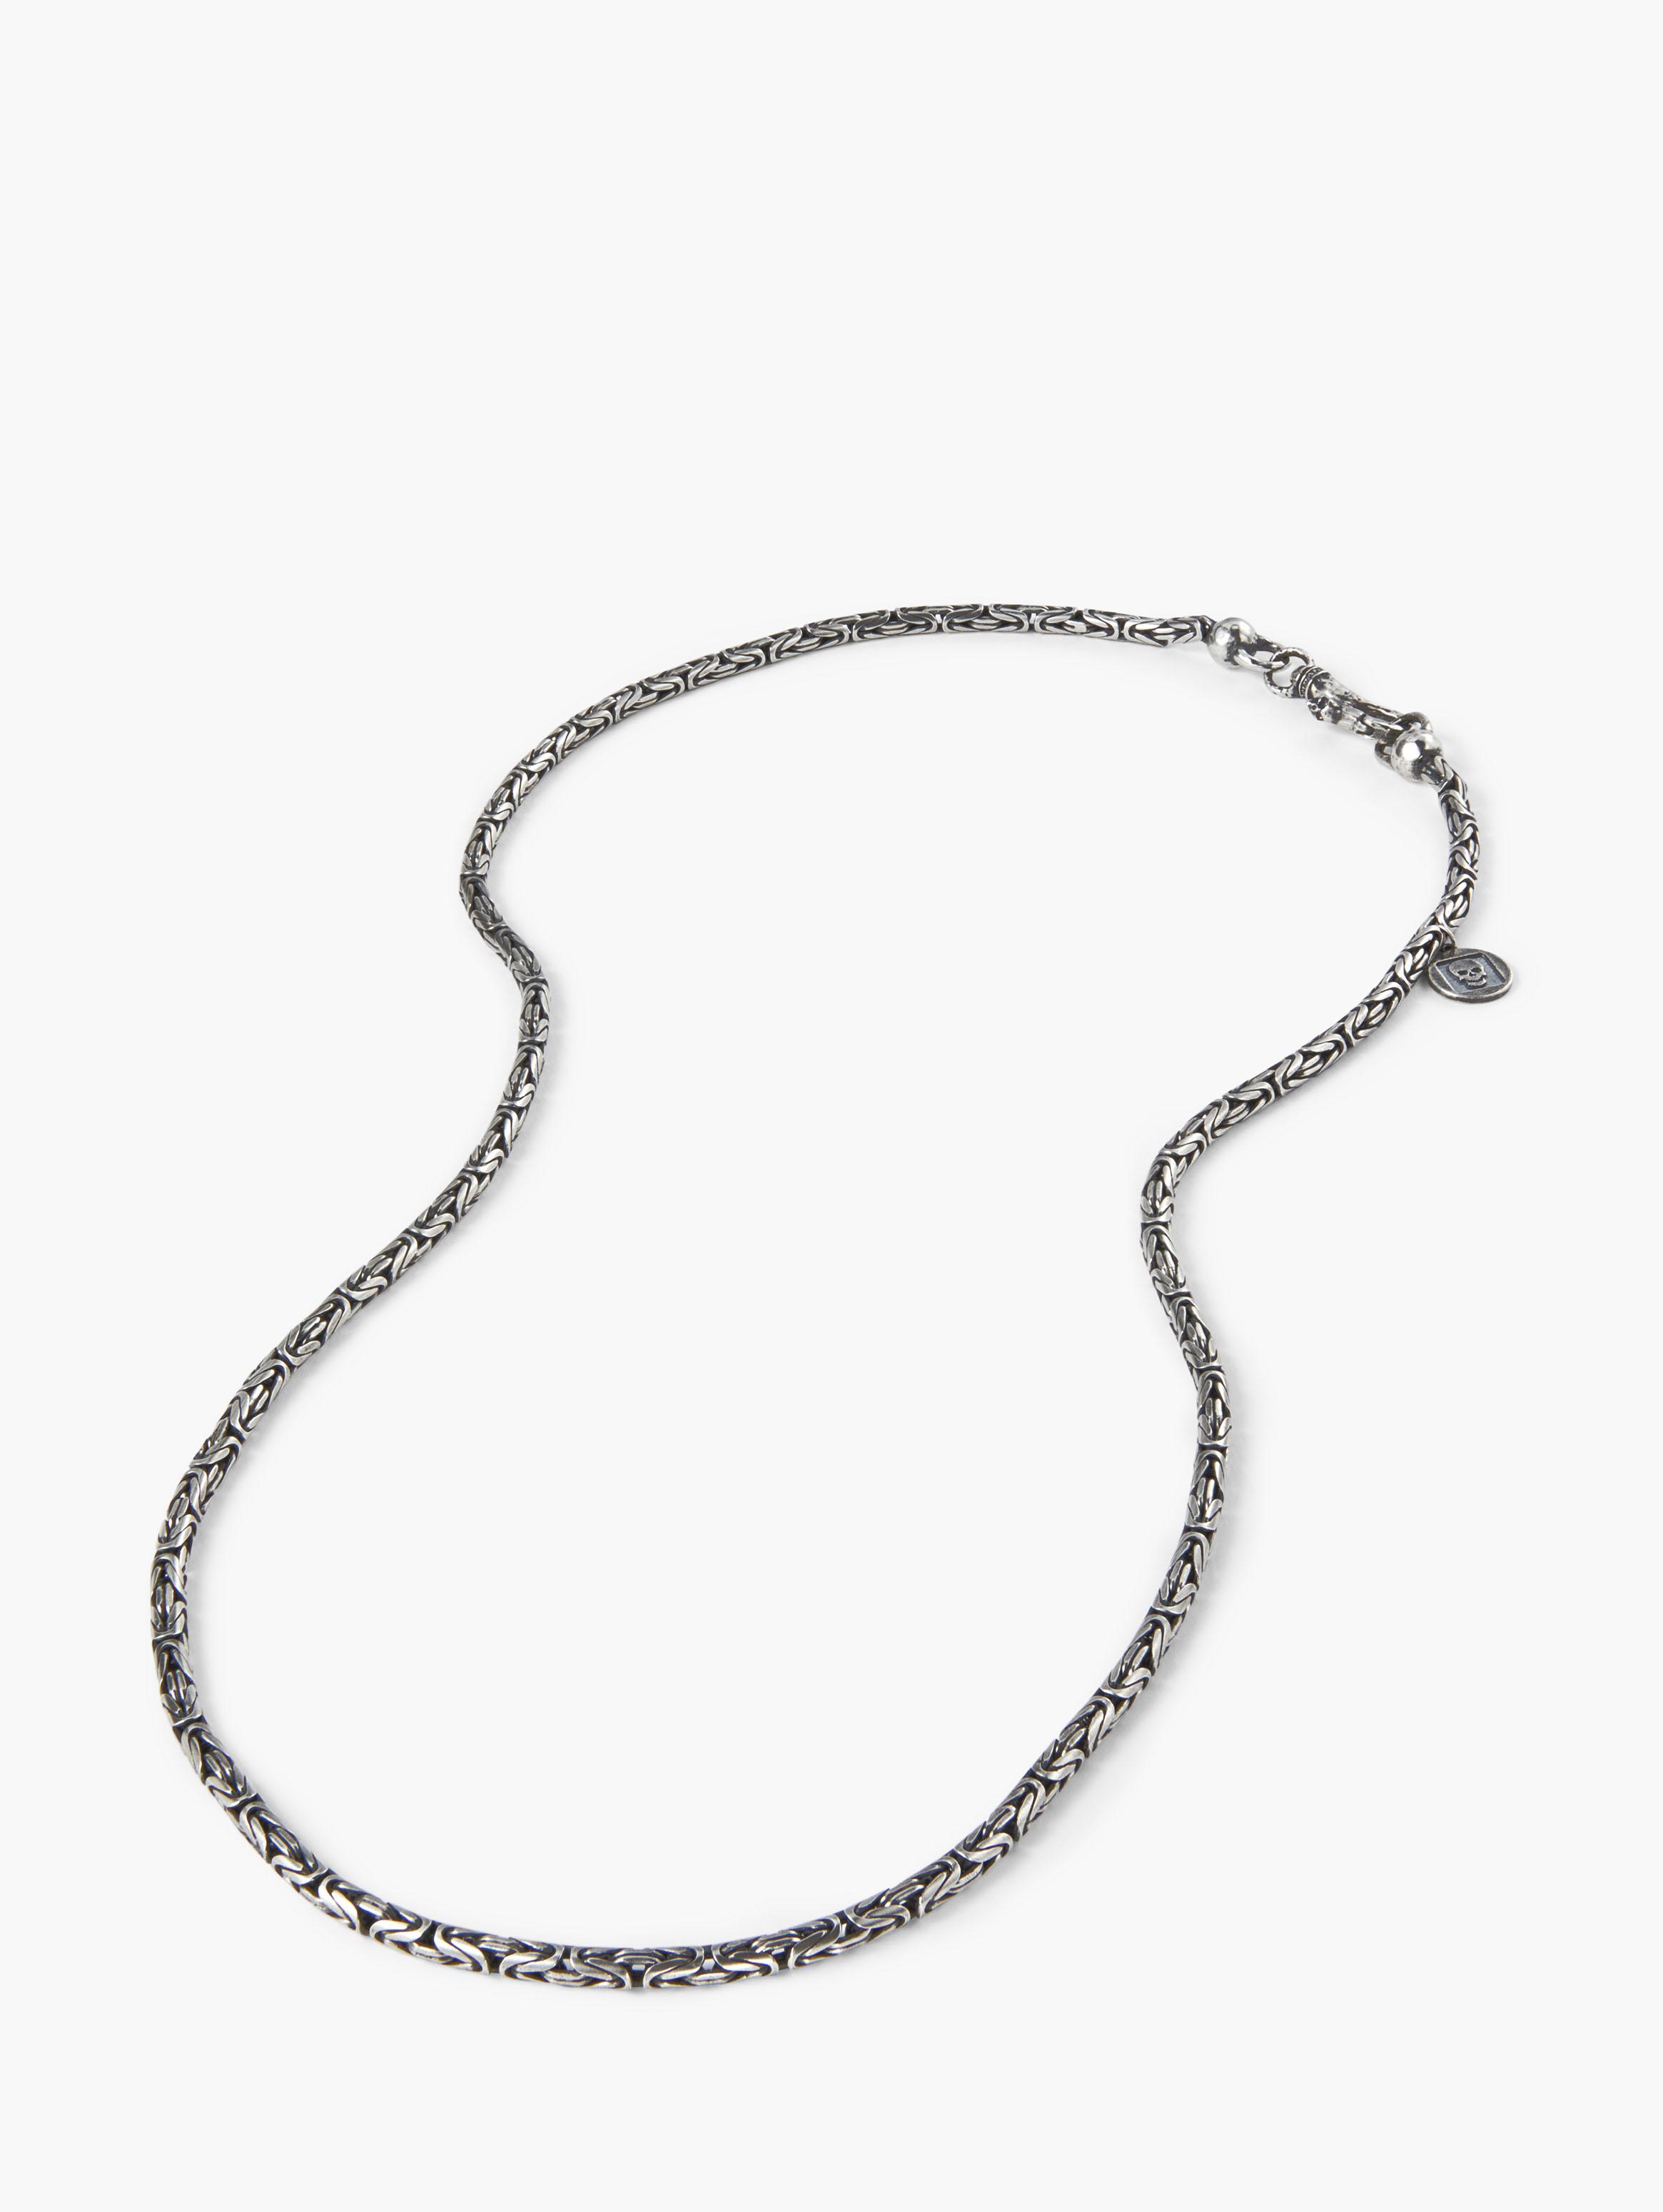 John Varvatos ANCIENT PADLOCK Chain Necklace for Men in Silver and Brass